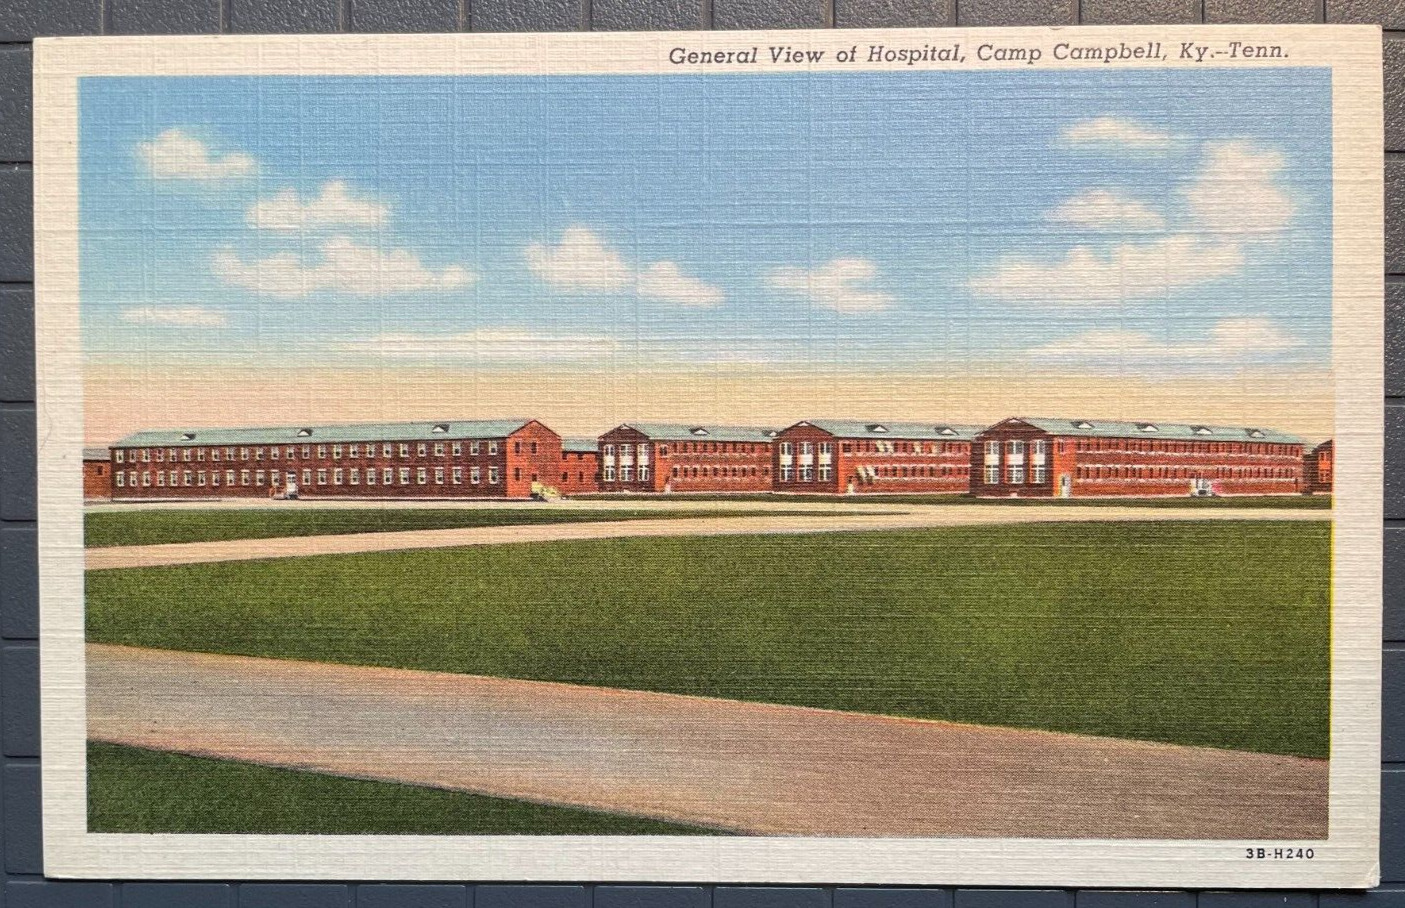 Vintage Postcard 1943 Hospital Camp Campbell Kentucky-Tennessee